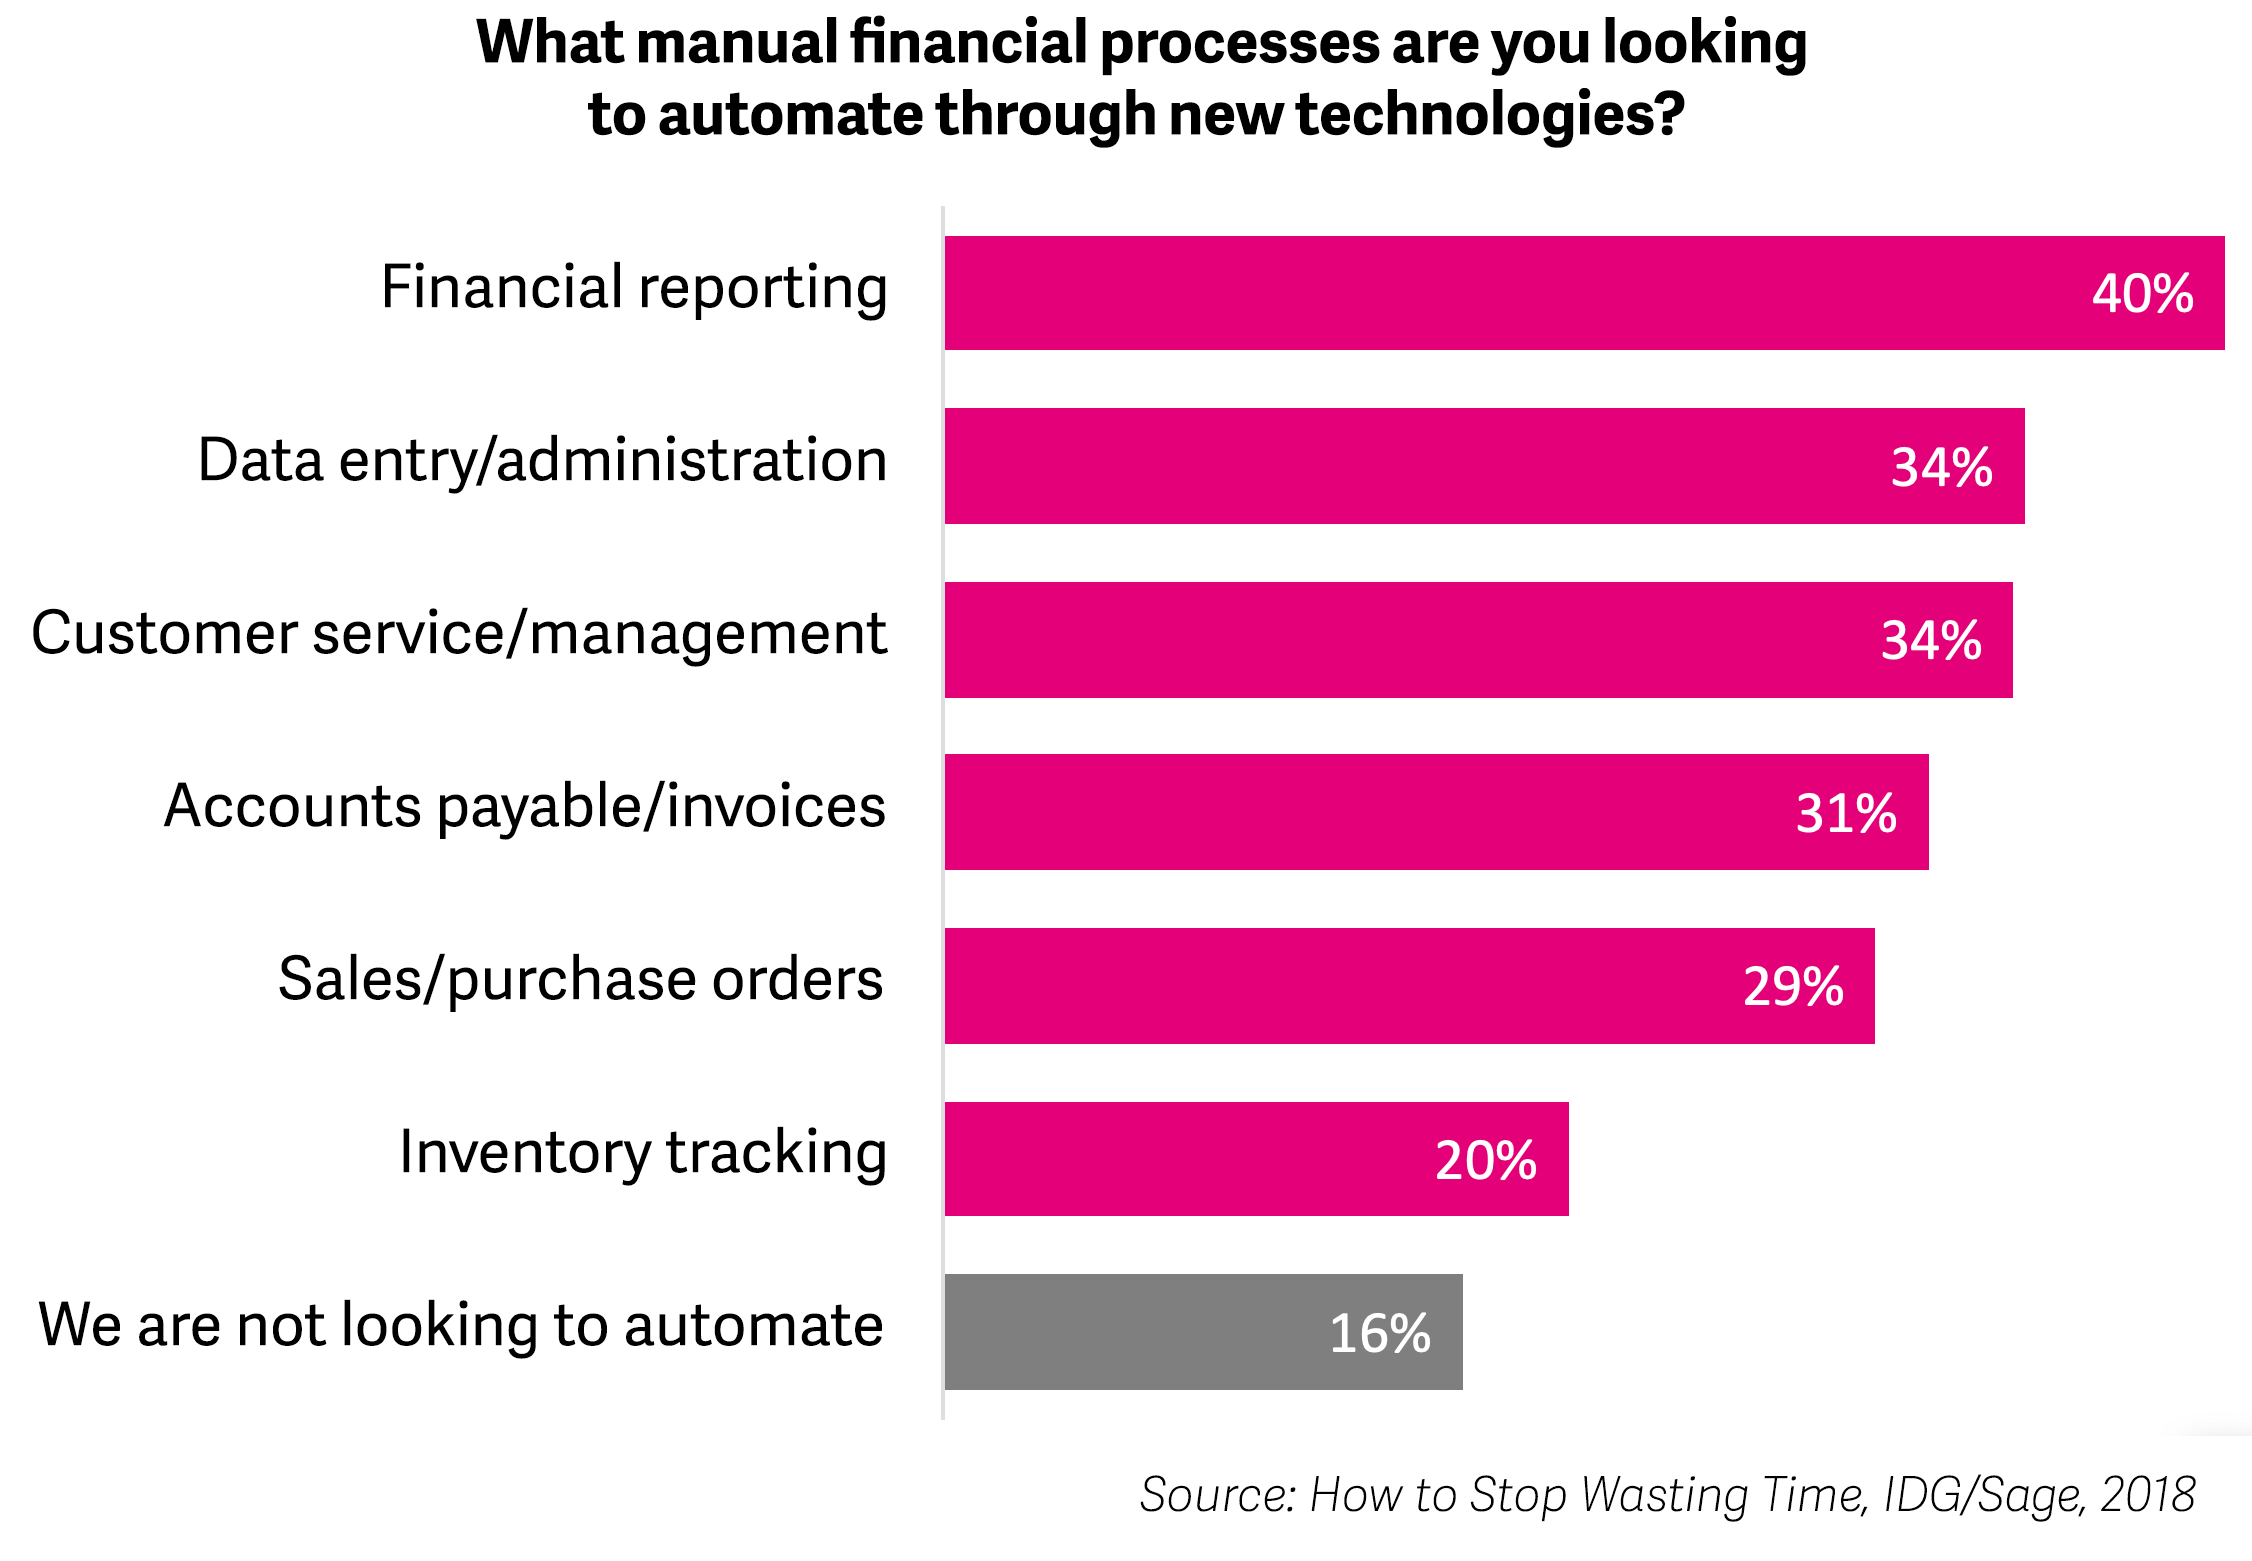 Manual financial processes to automate